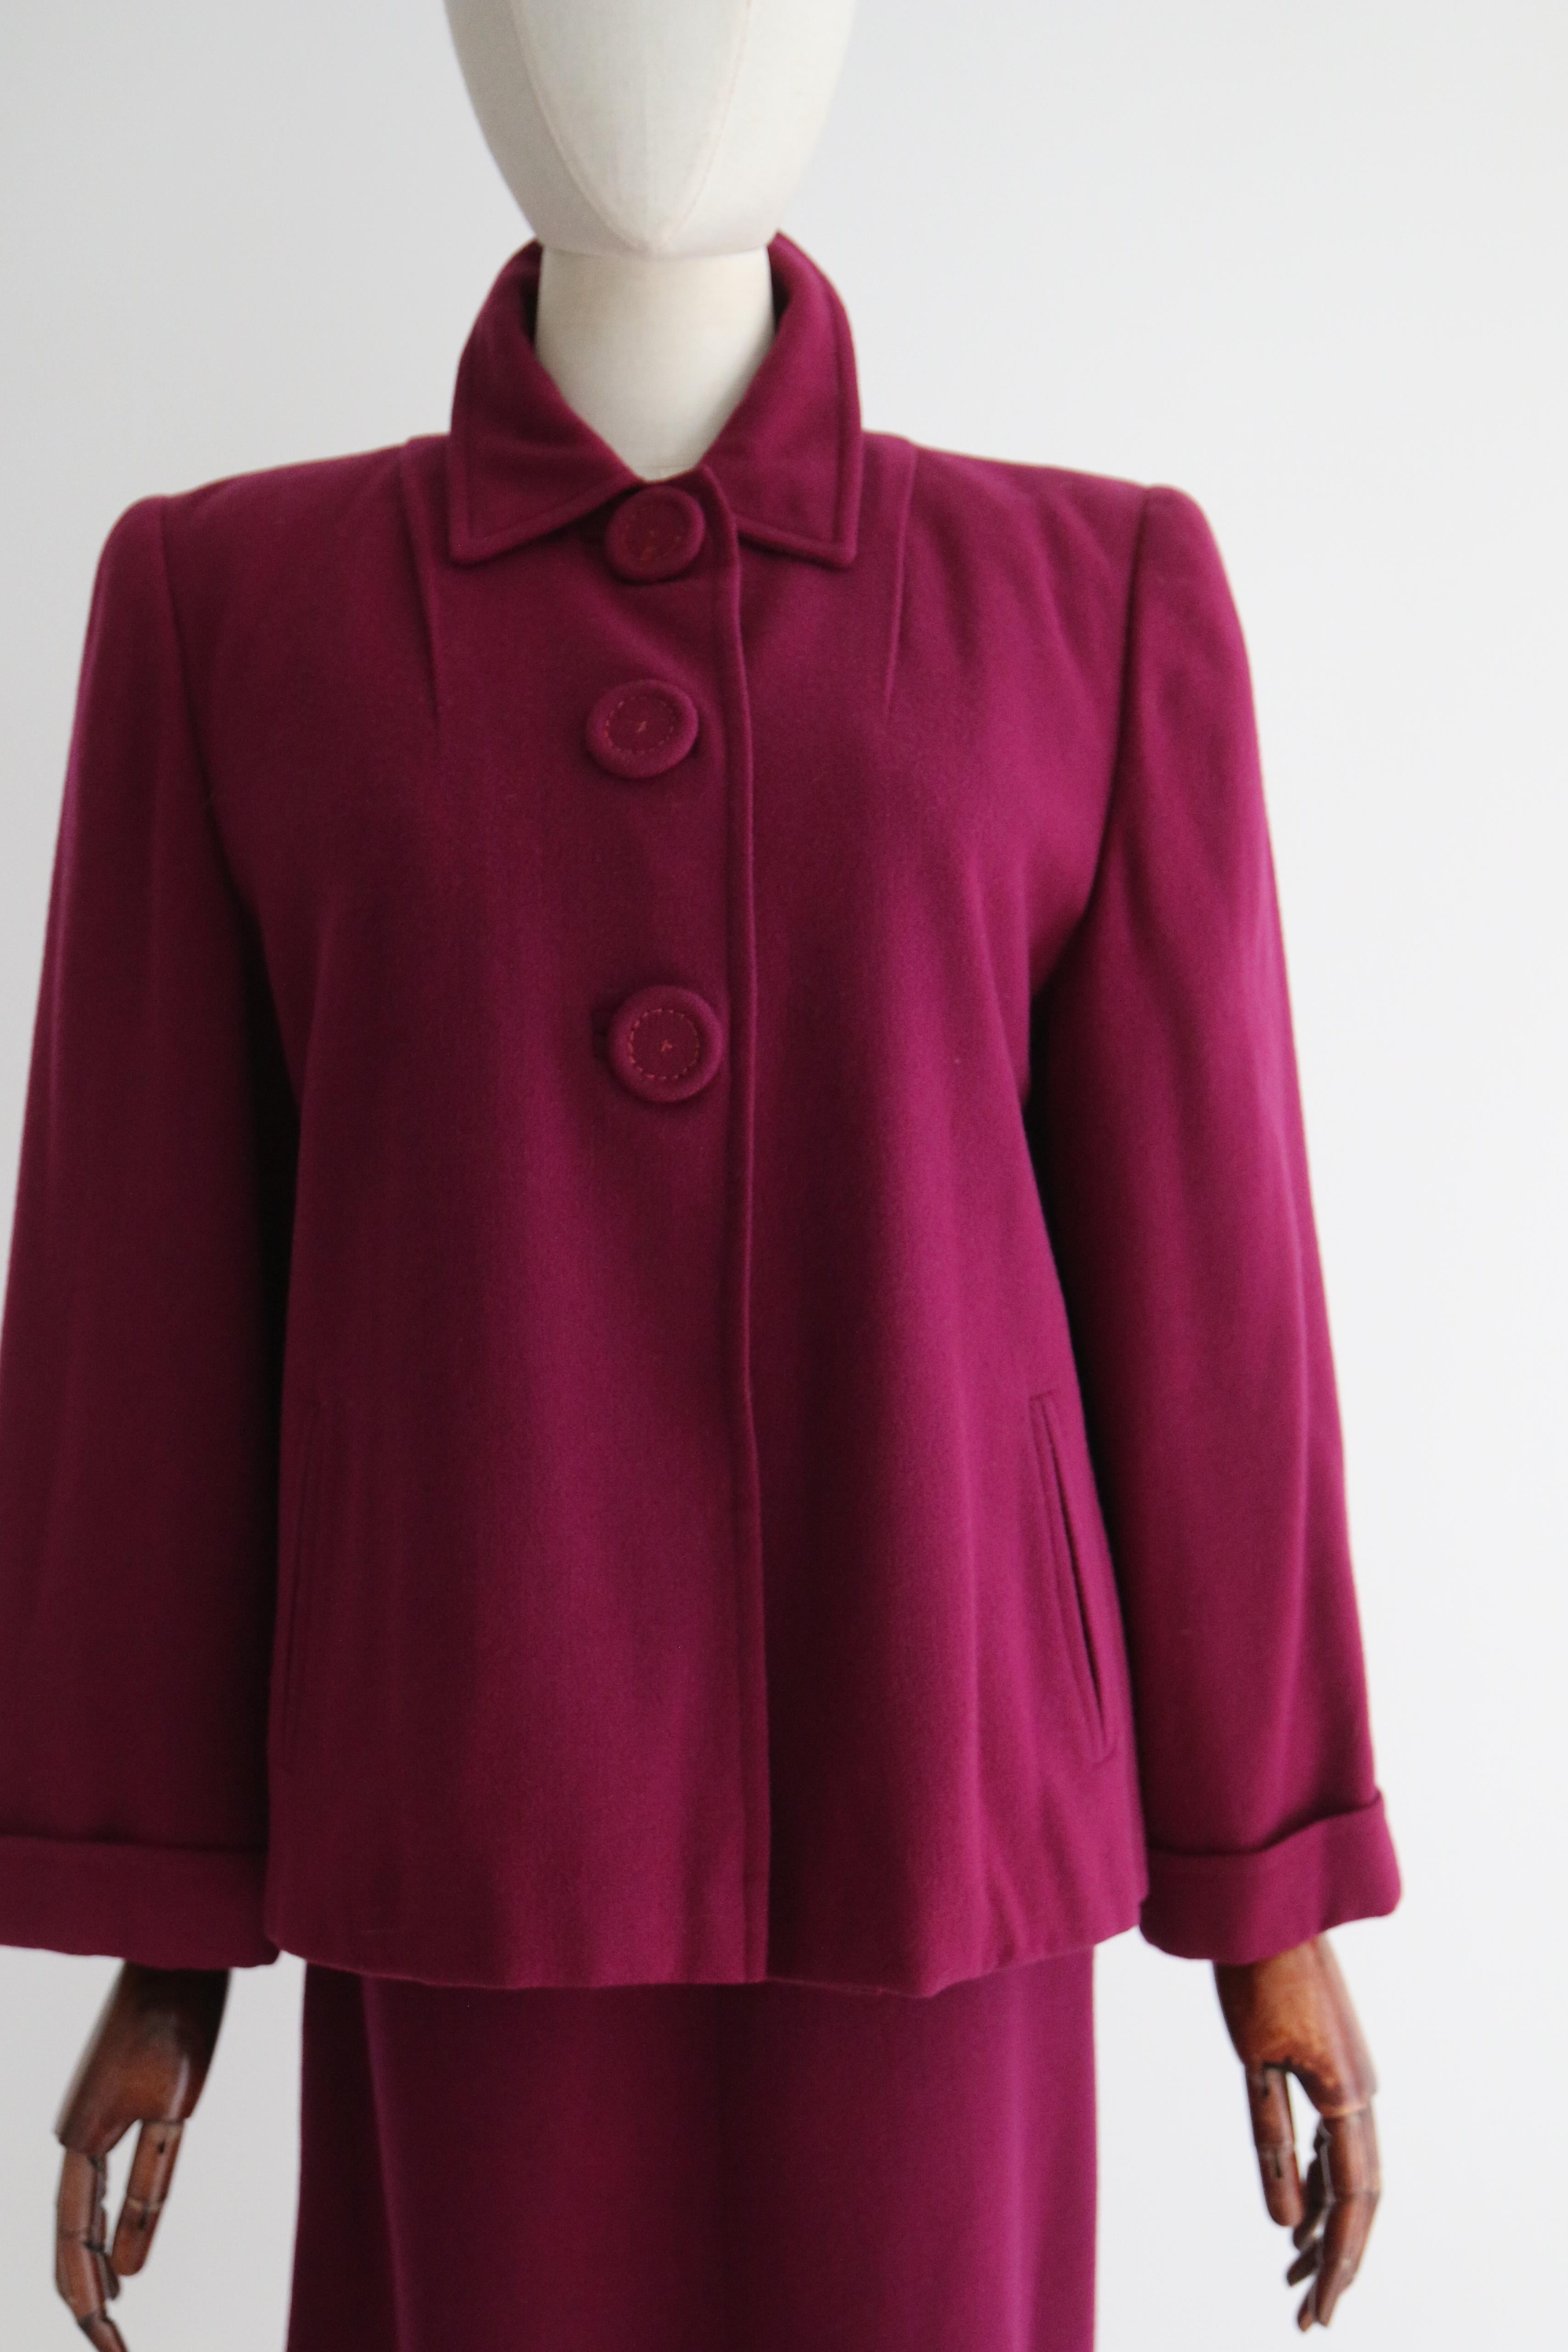 Red Vintage 1940's Plum Three Piece Wool Suit UK 10-12 US 6-8 For Sale